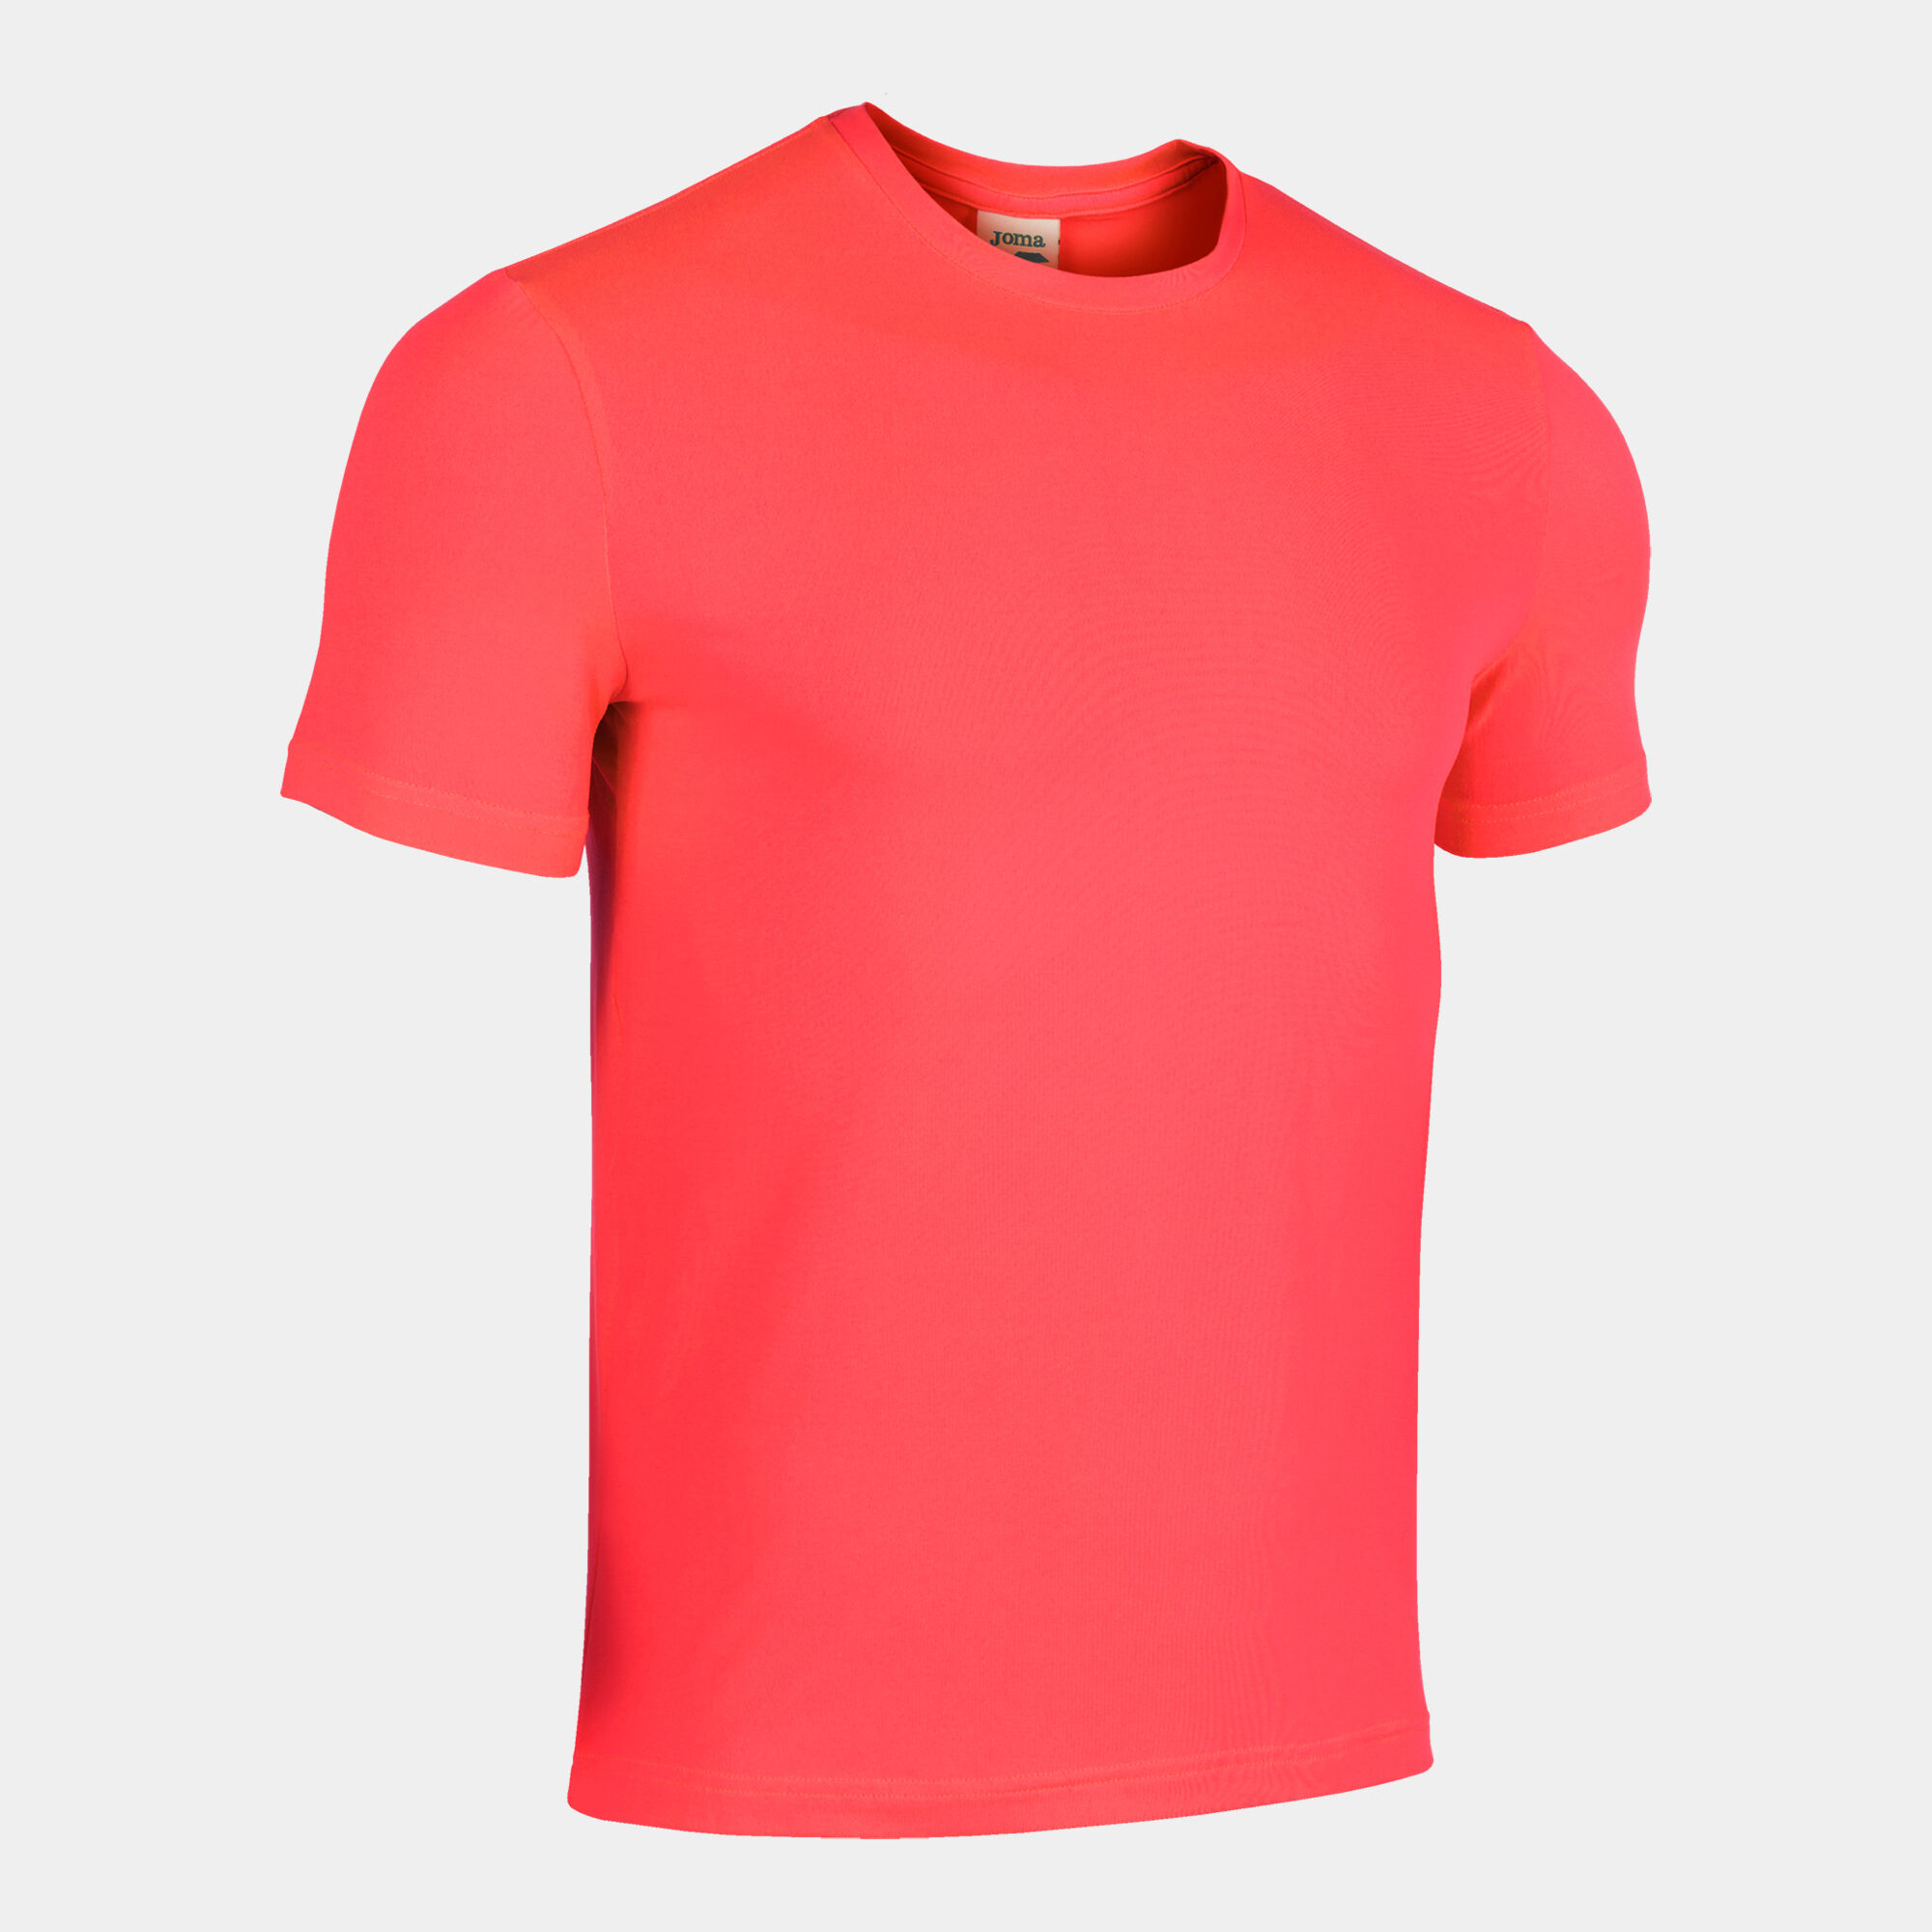 MAILLOT MANCHES COURTES HOMME SYDNEY CORAIL FLUO